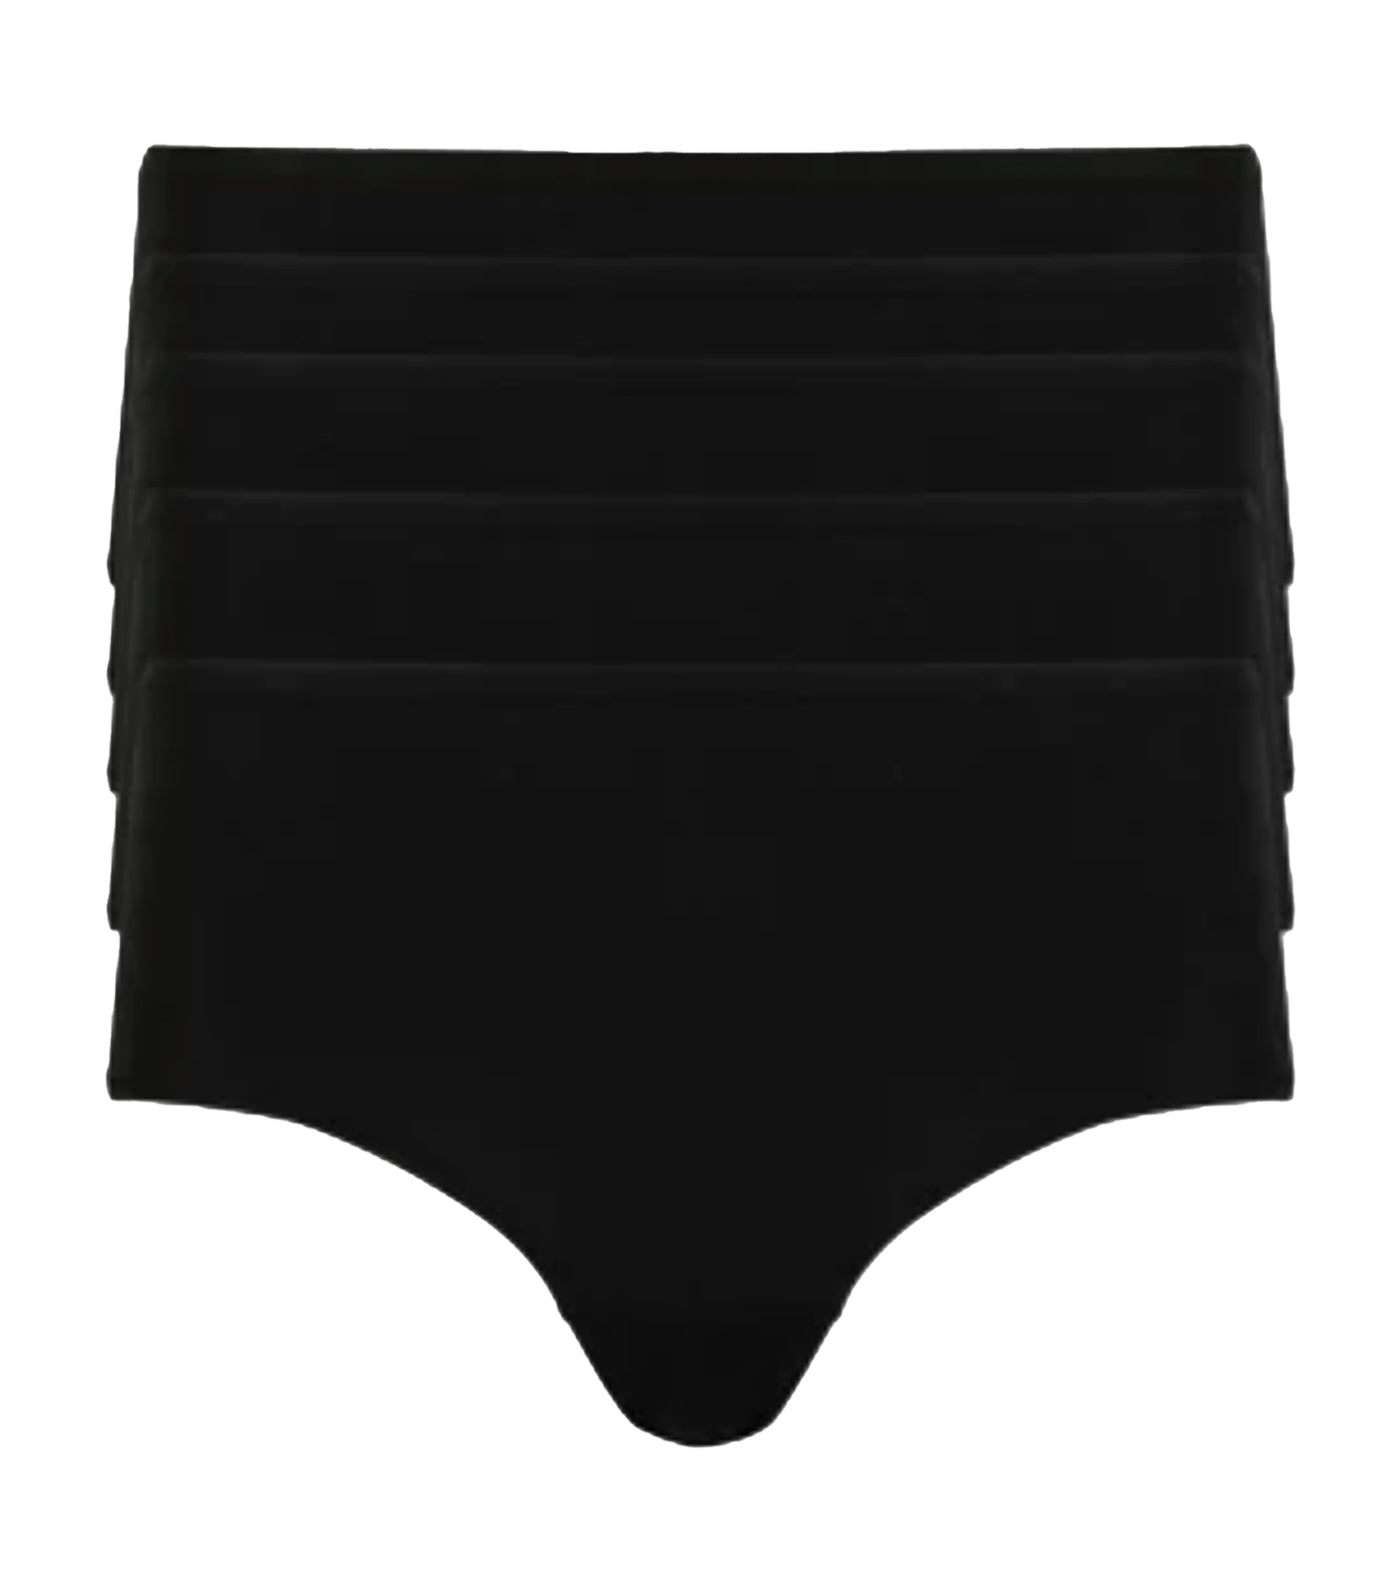 marks and spencer 5 pack no vpl microfiber low rise shorts - black